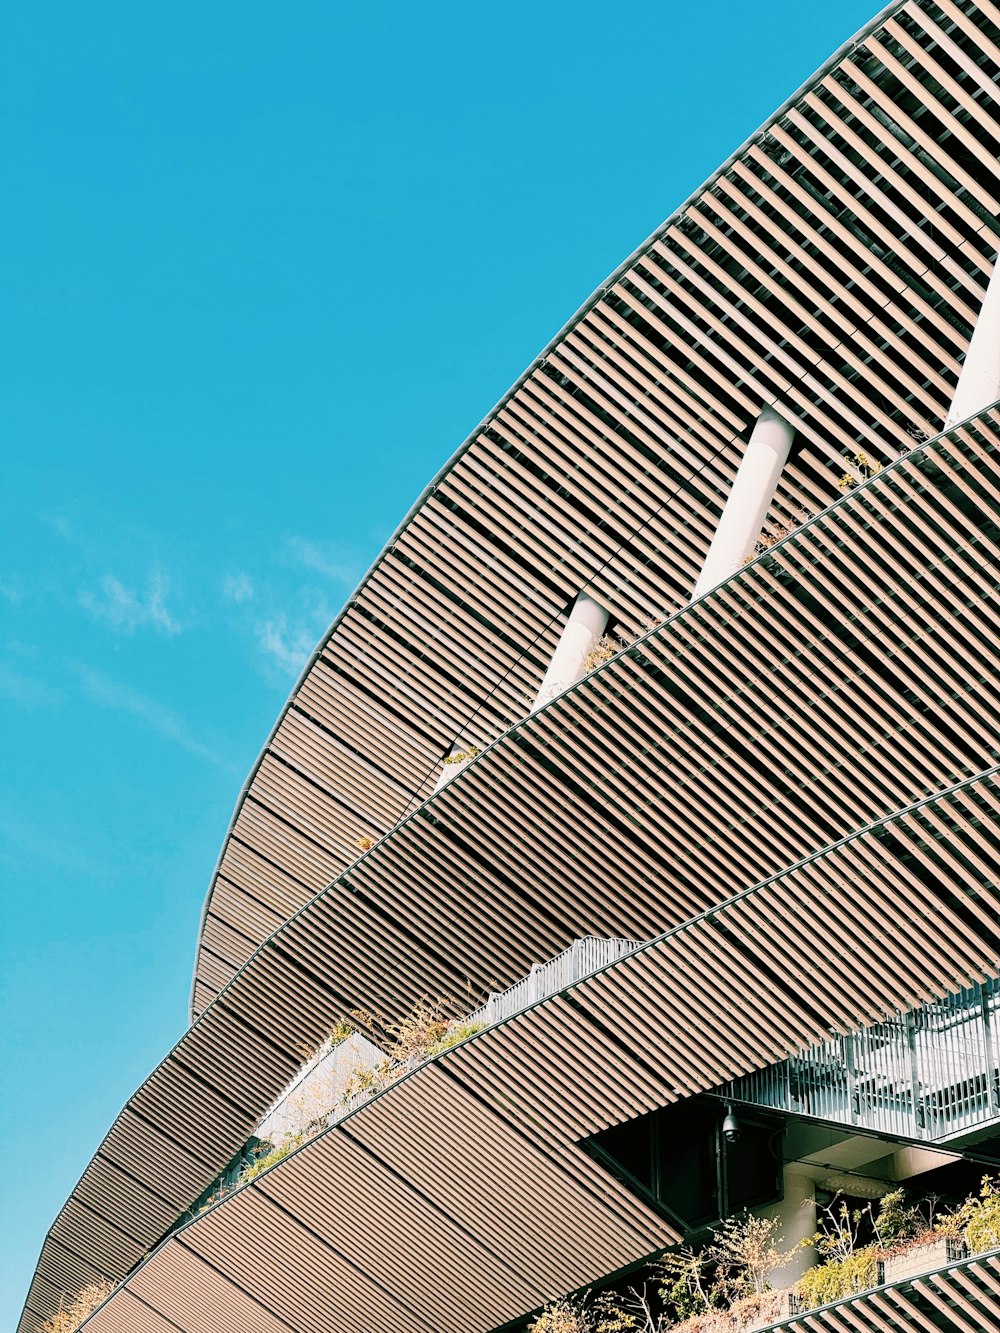 a bird flying over a building with a sky background